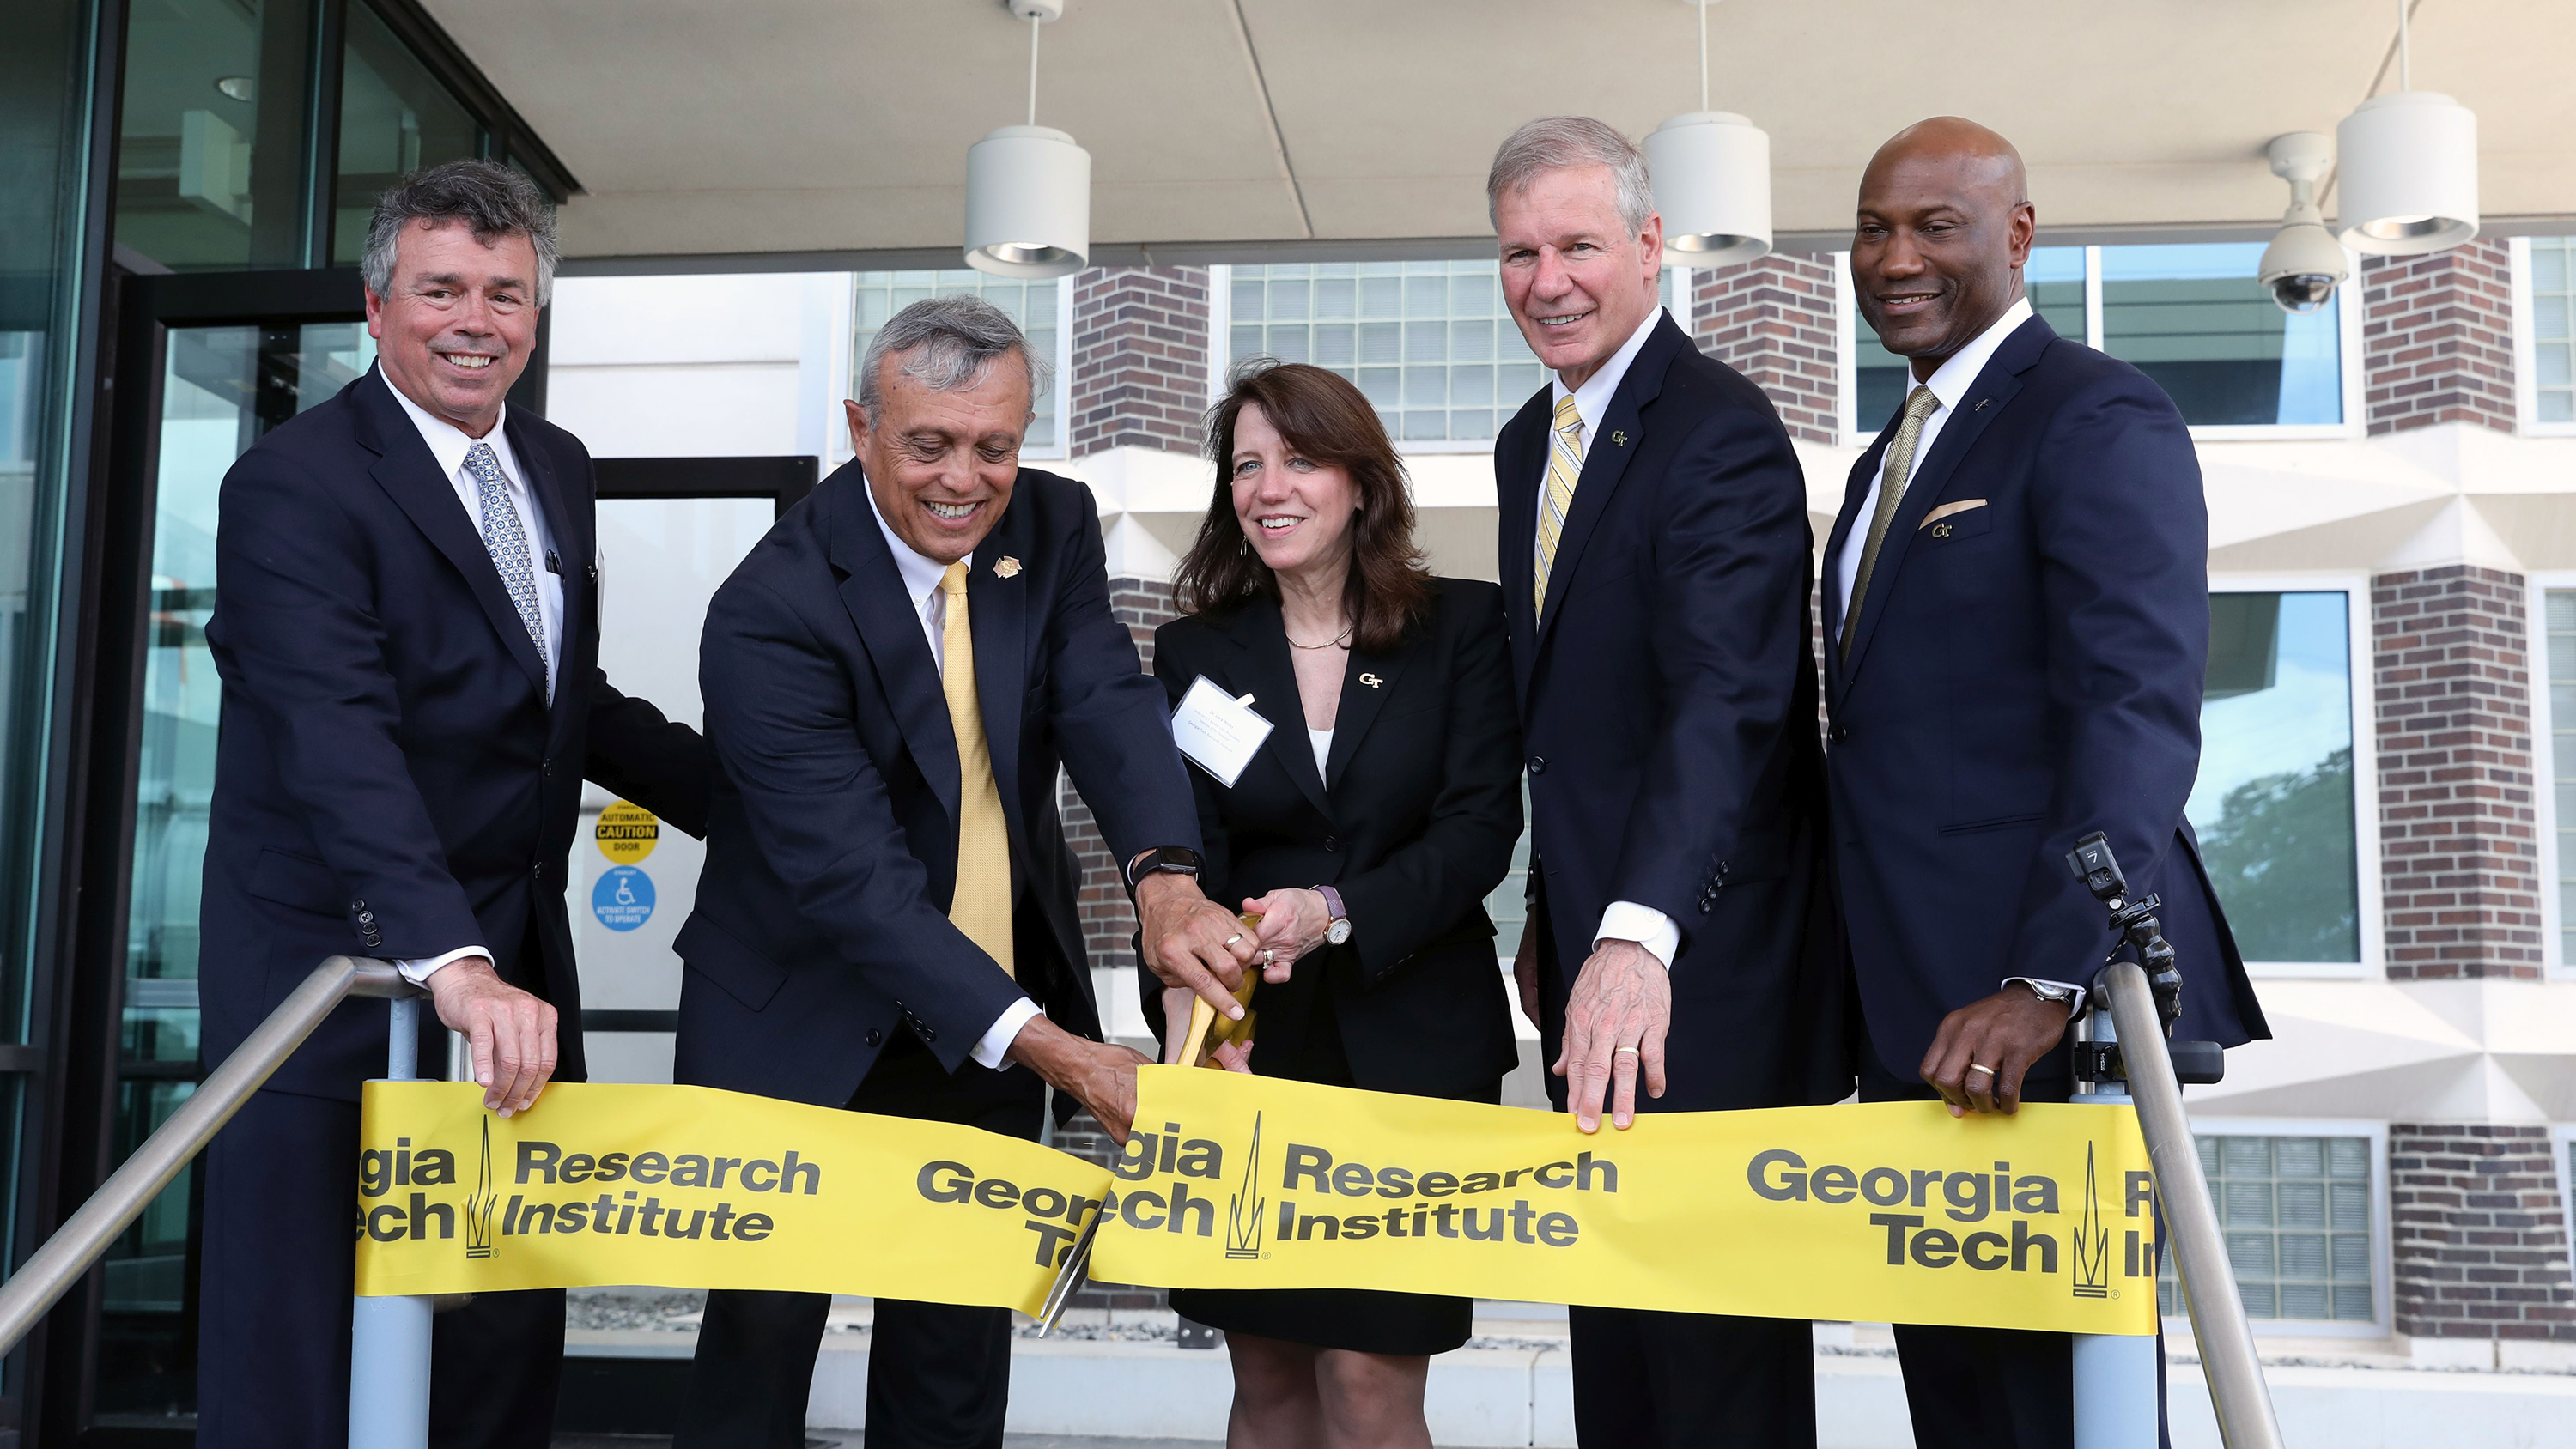 Cutting the ribbon on the new GTRI Cobb County Research Facility South Campus were, from left, Georgia Tech executive director of Real Estate Development Tony Zivalich, Chairman of the Cobb County Board of Commissioners Mike Boyce, Interim Director of GTRI Lora Weiss, Georgia Tech President G.P. “Bud” Peterson, and Lockheed Martin's new Vice President and General Manager Rod McLean. Photo: Sean McNeil